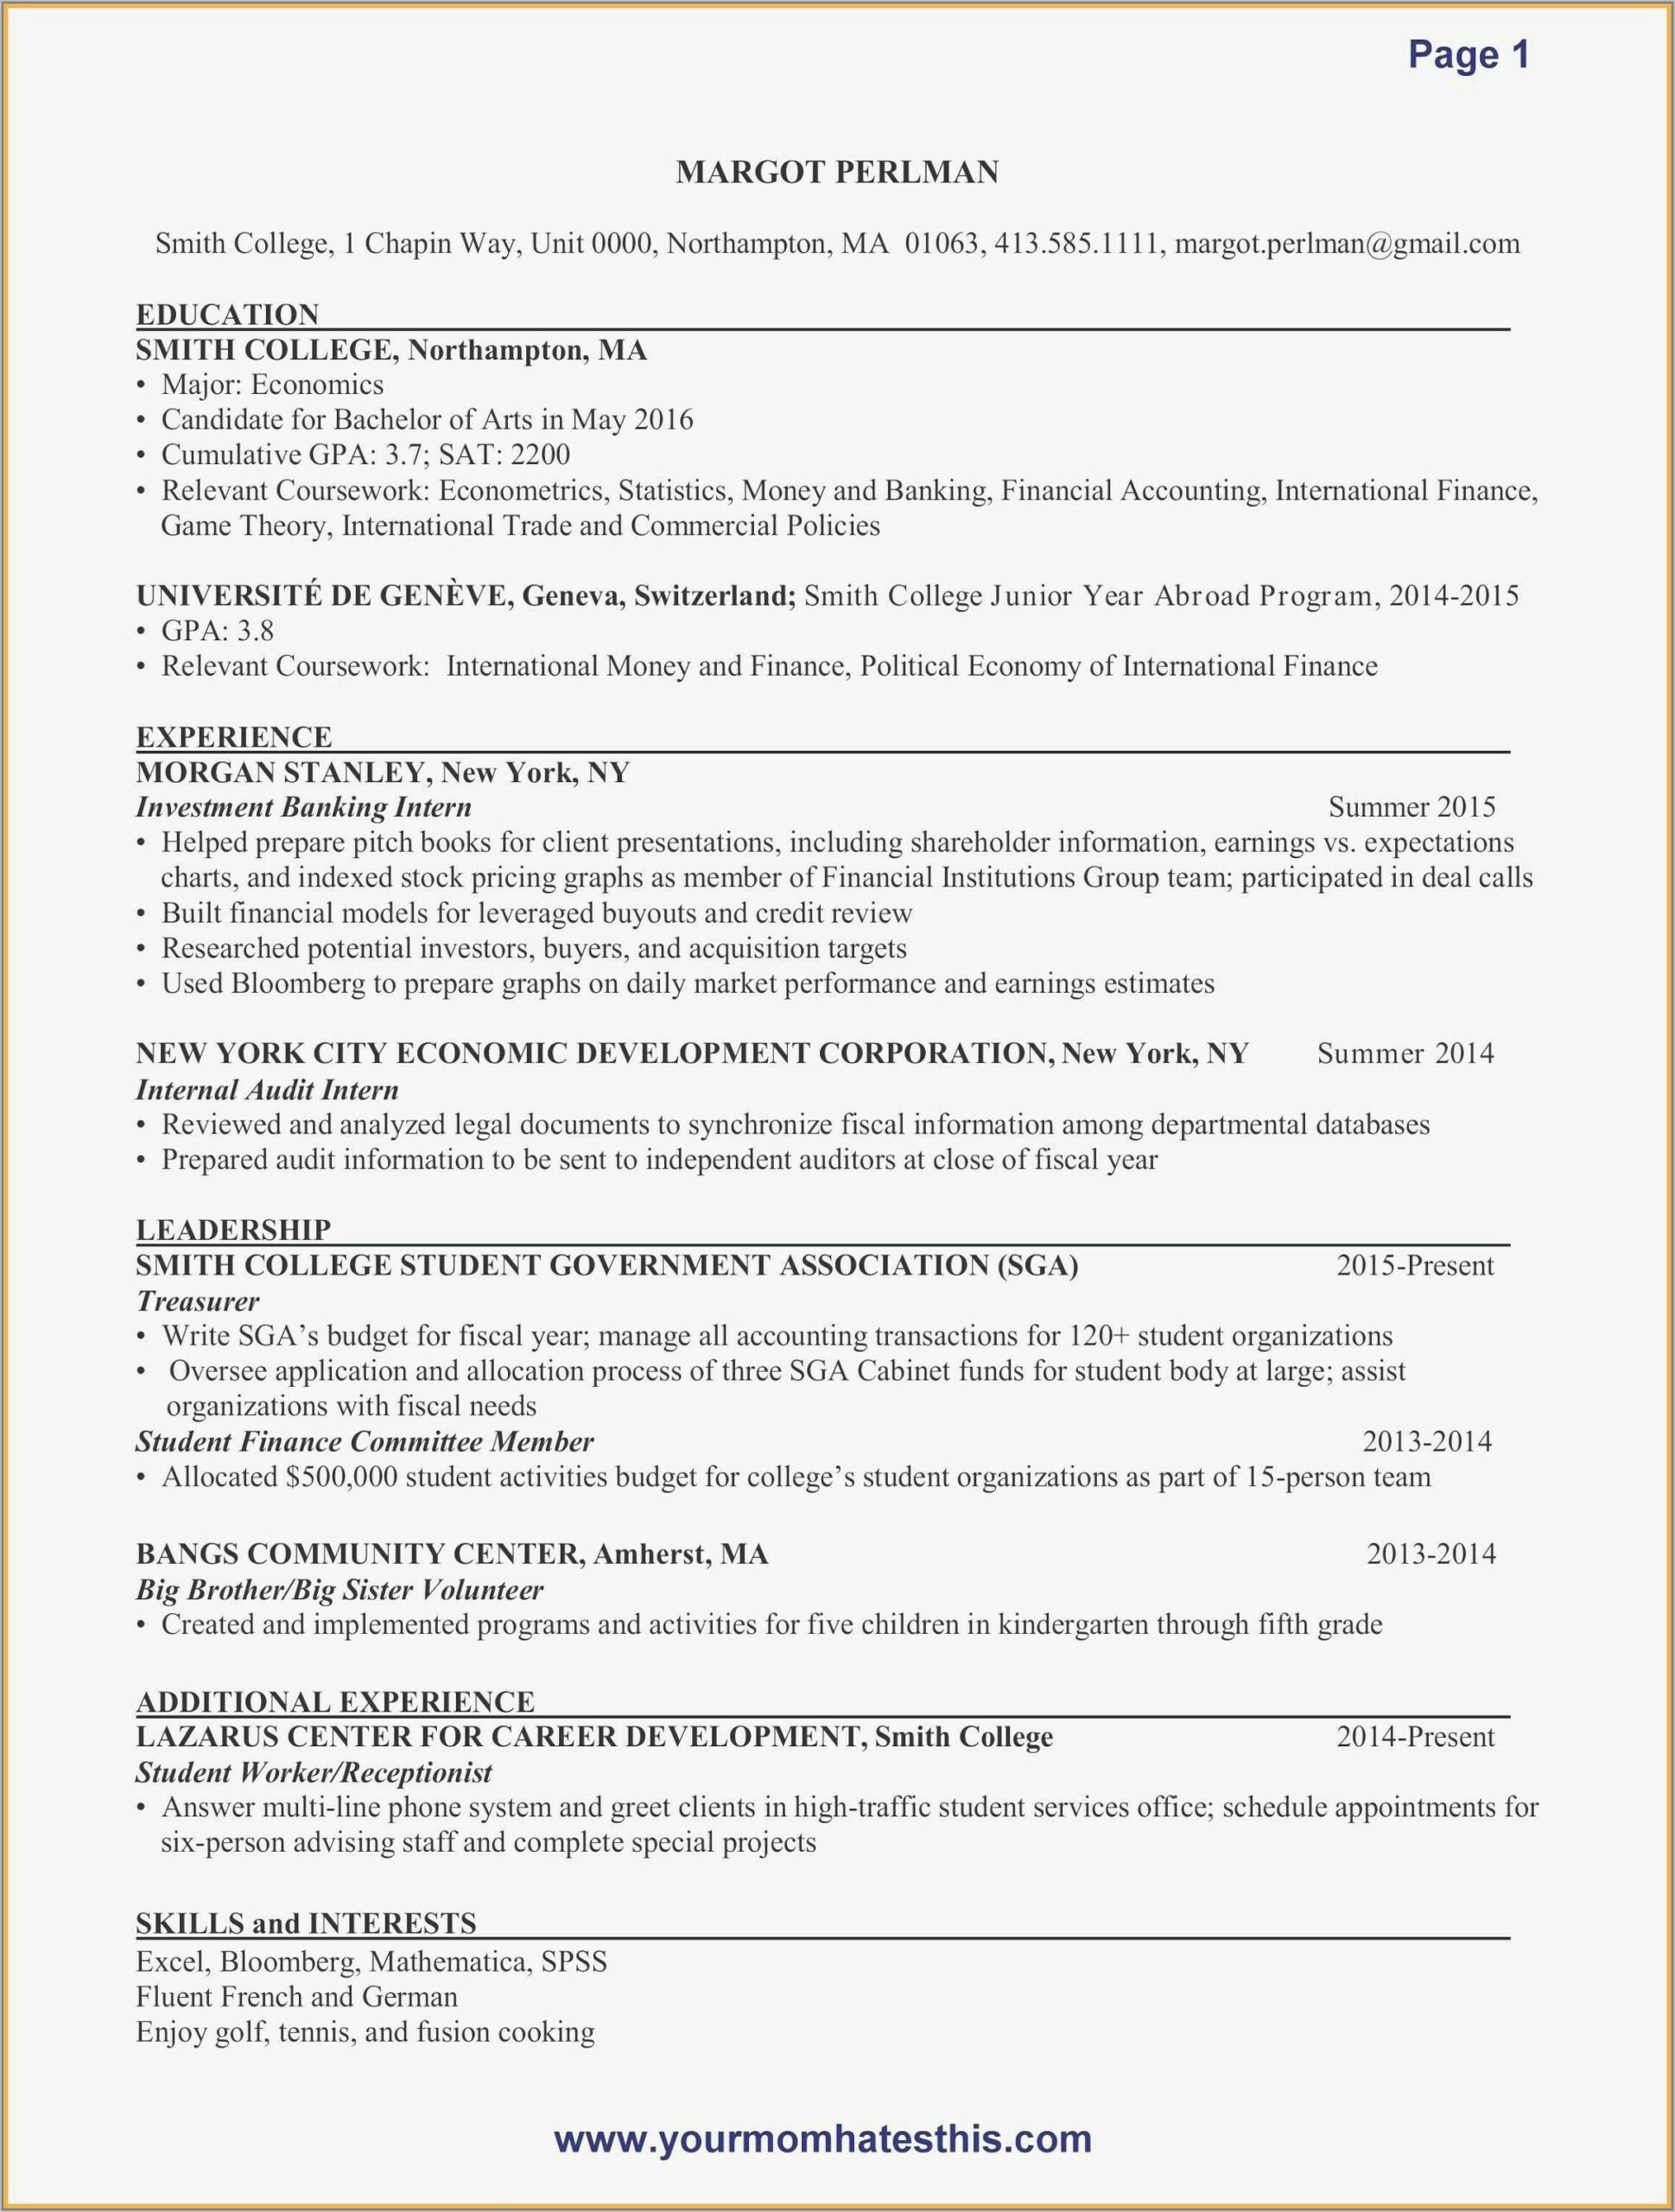 Professional Resume Format For Accountant